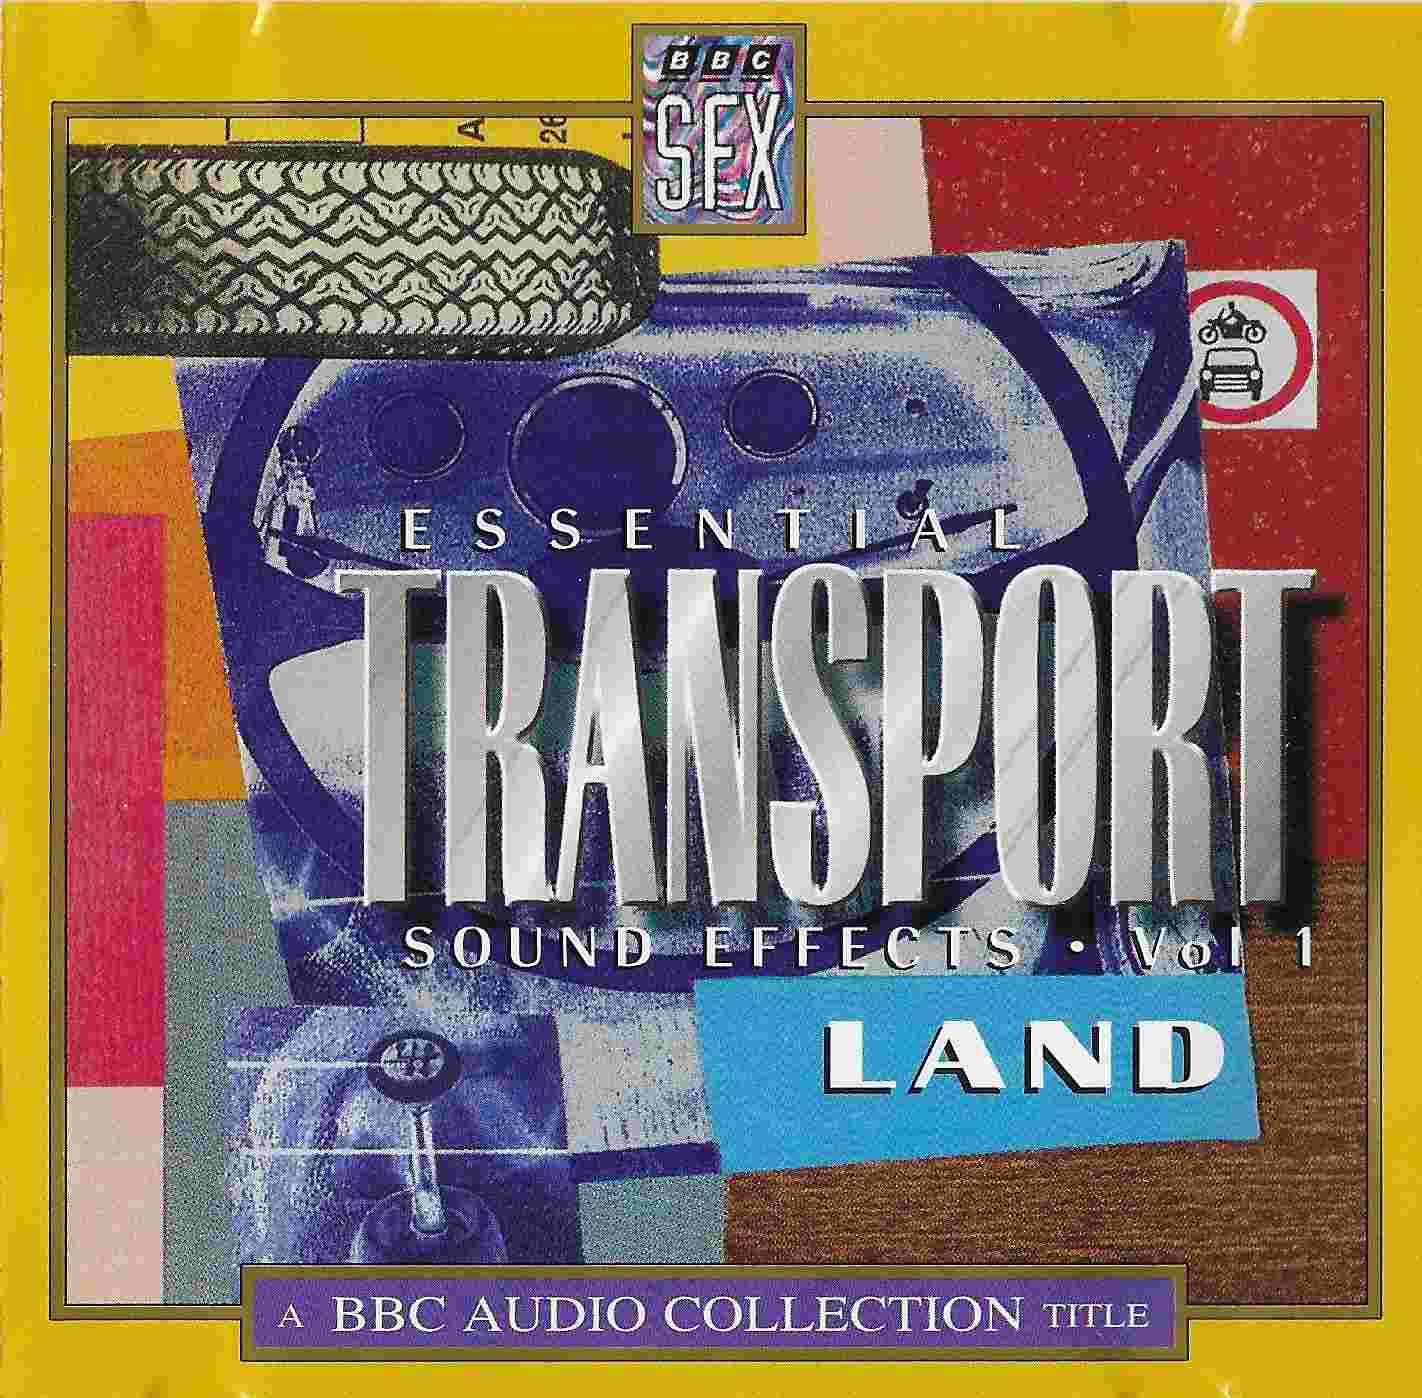 Picture of BBCCD865 Essential transport sound effects - Volume 1 by artist Various from the BBC cds - Records and Tapes library